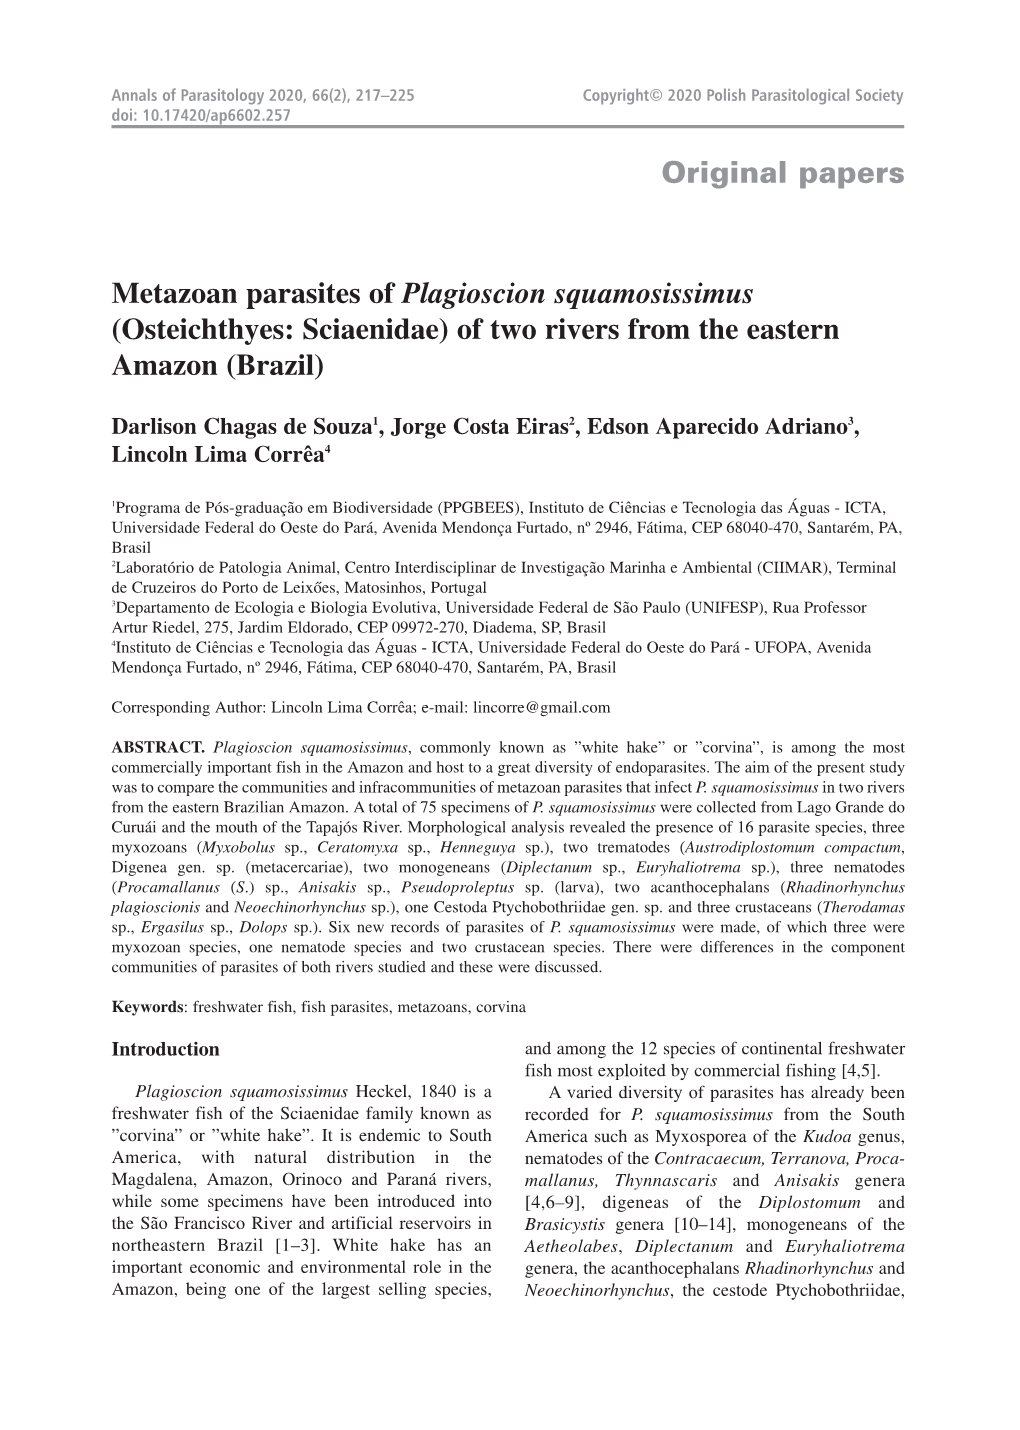 Original Papers Metazoan Parasites of Plagioscion Squamosissimus (Osteichthyes: Sciaenidae) of Two Rivers from the Eastern Amazo